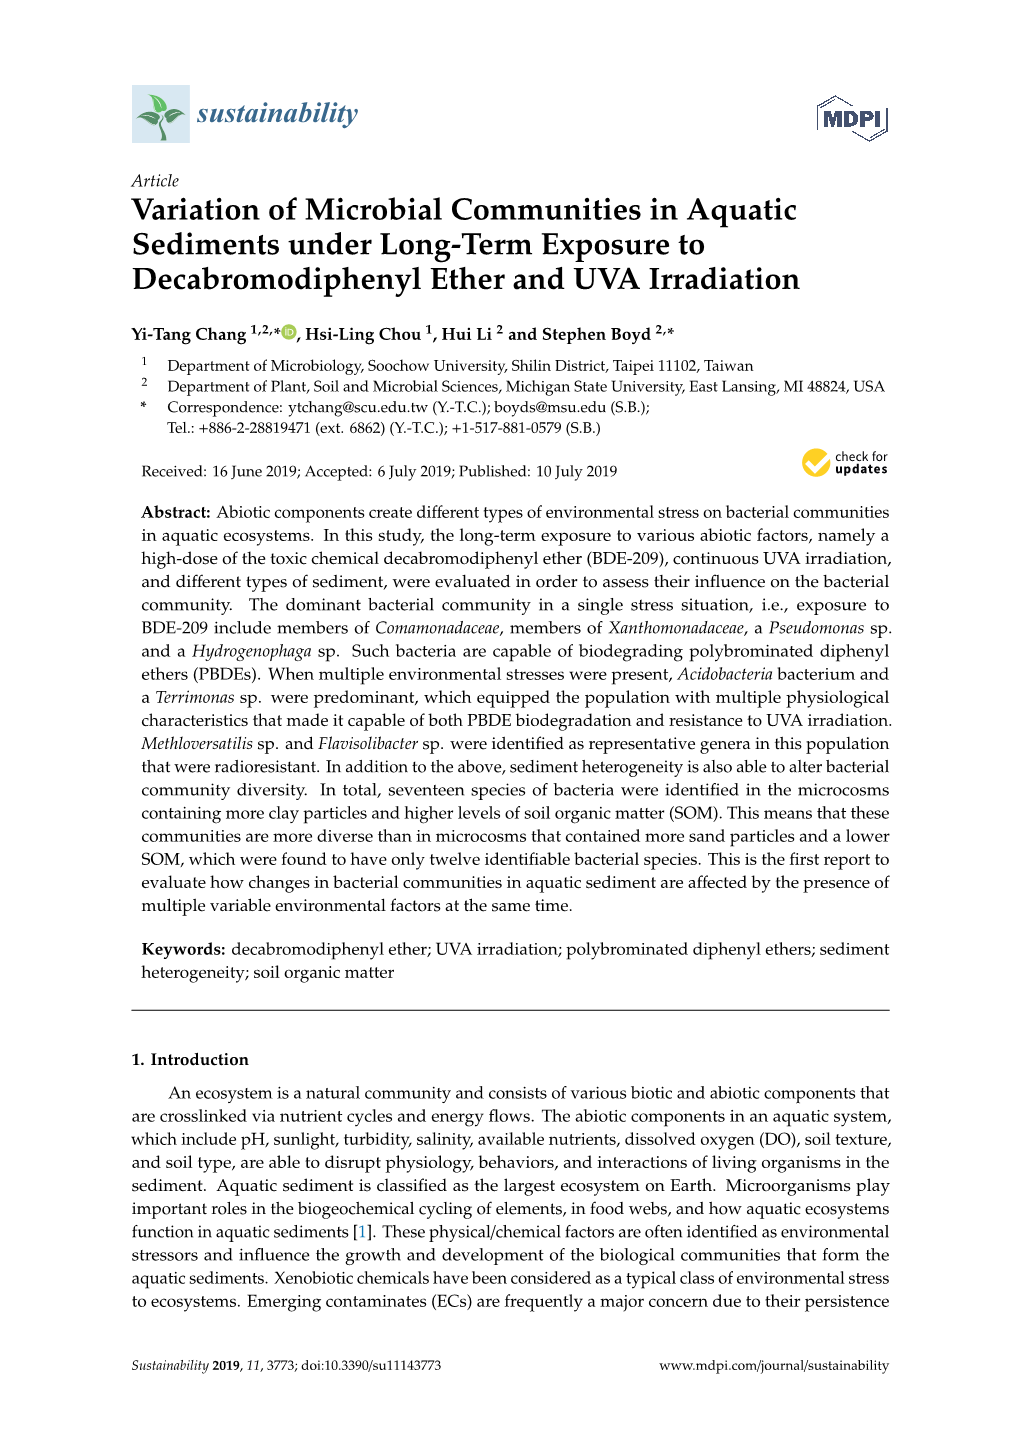 Variation of Microbial Communities in Aquatic Sediments Under Long-Term Exposure to Decabromodiphenyl Ether and UVA Irradiation